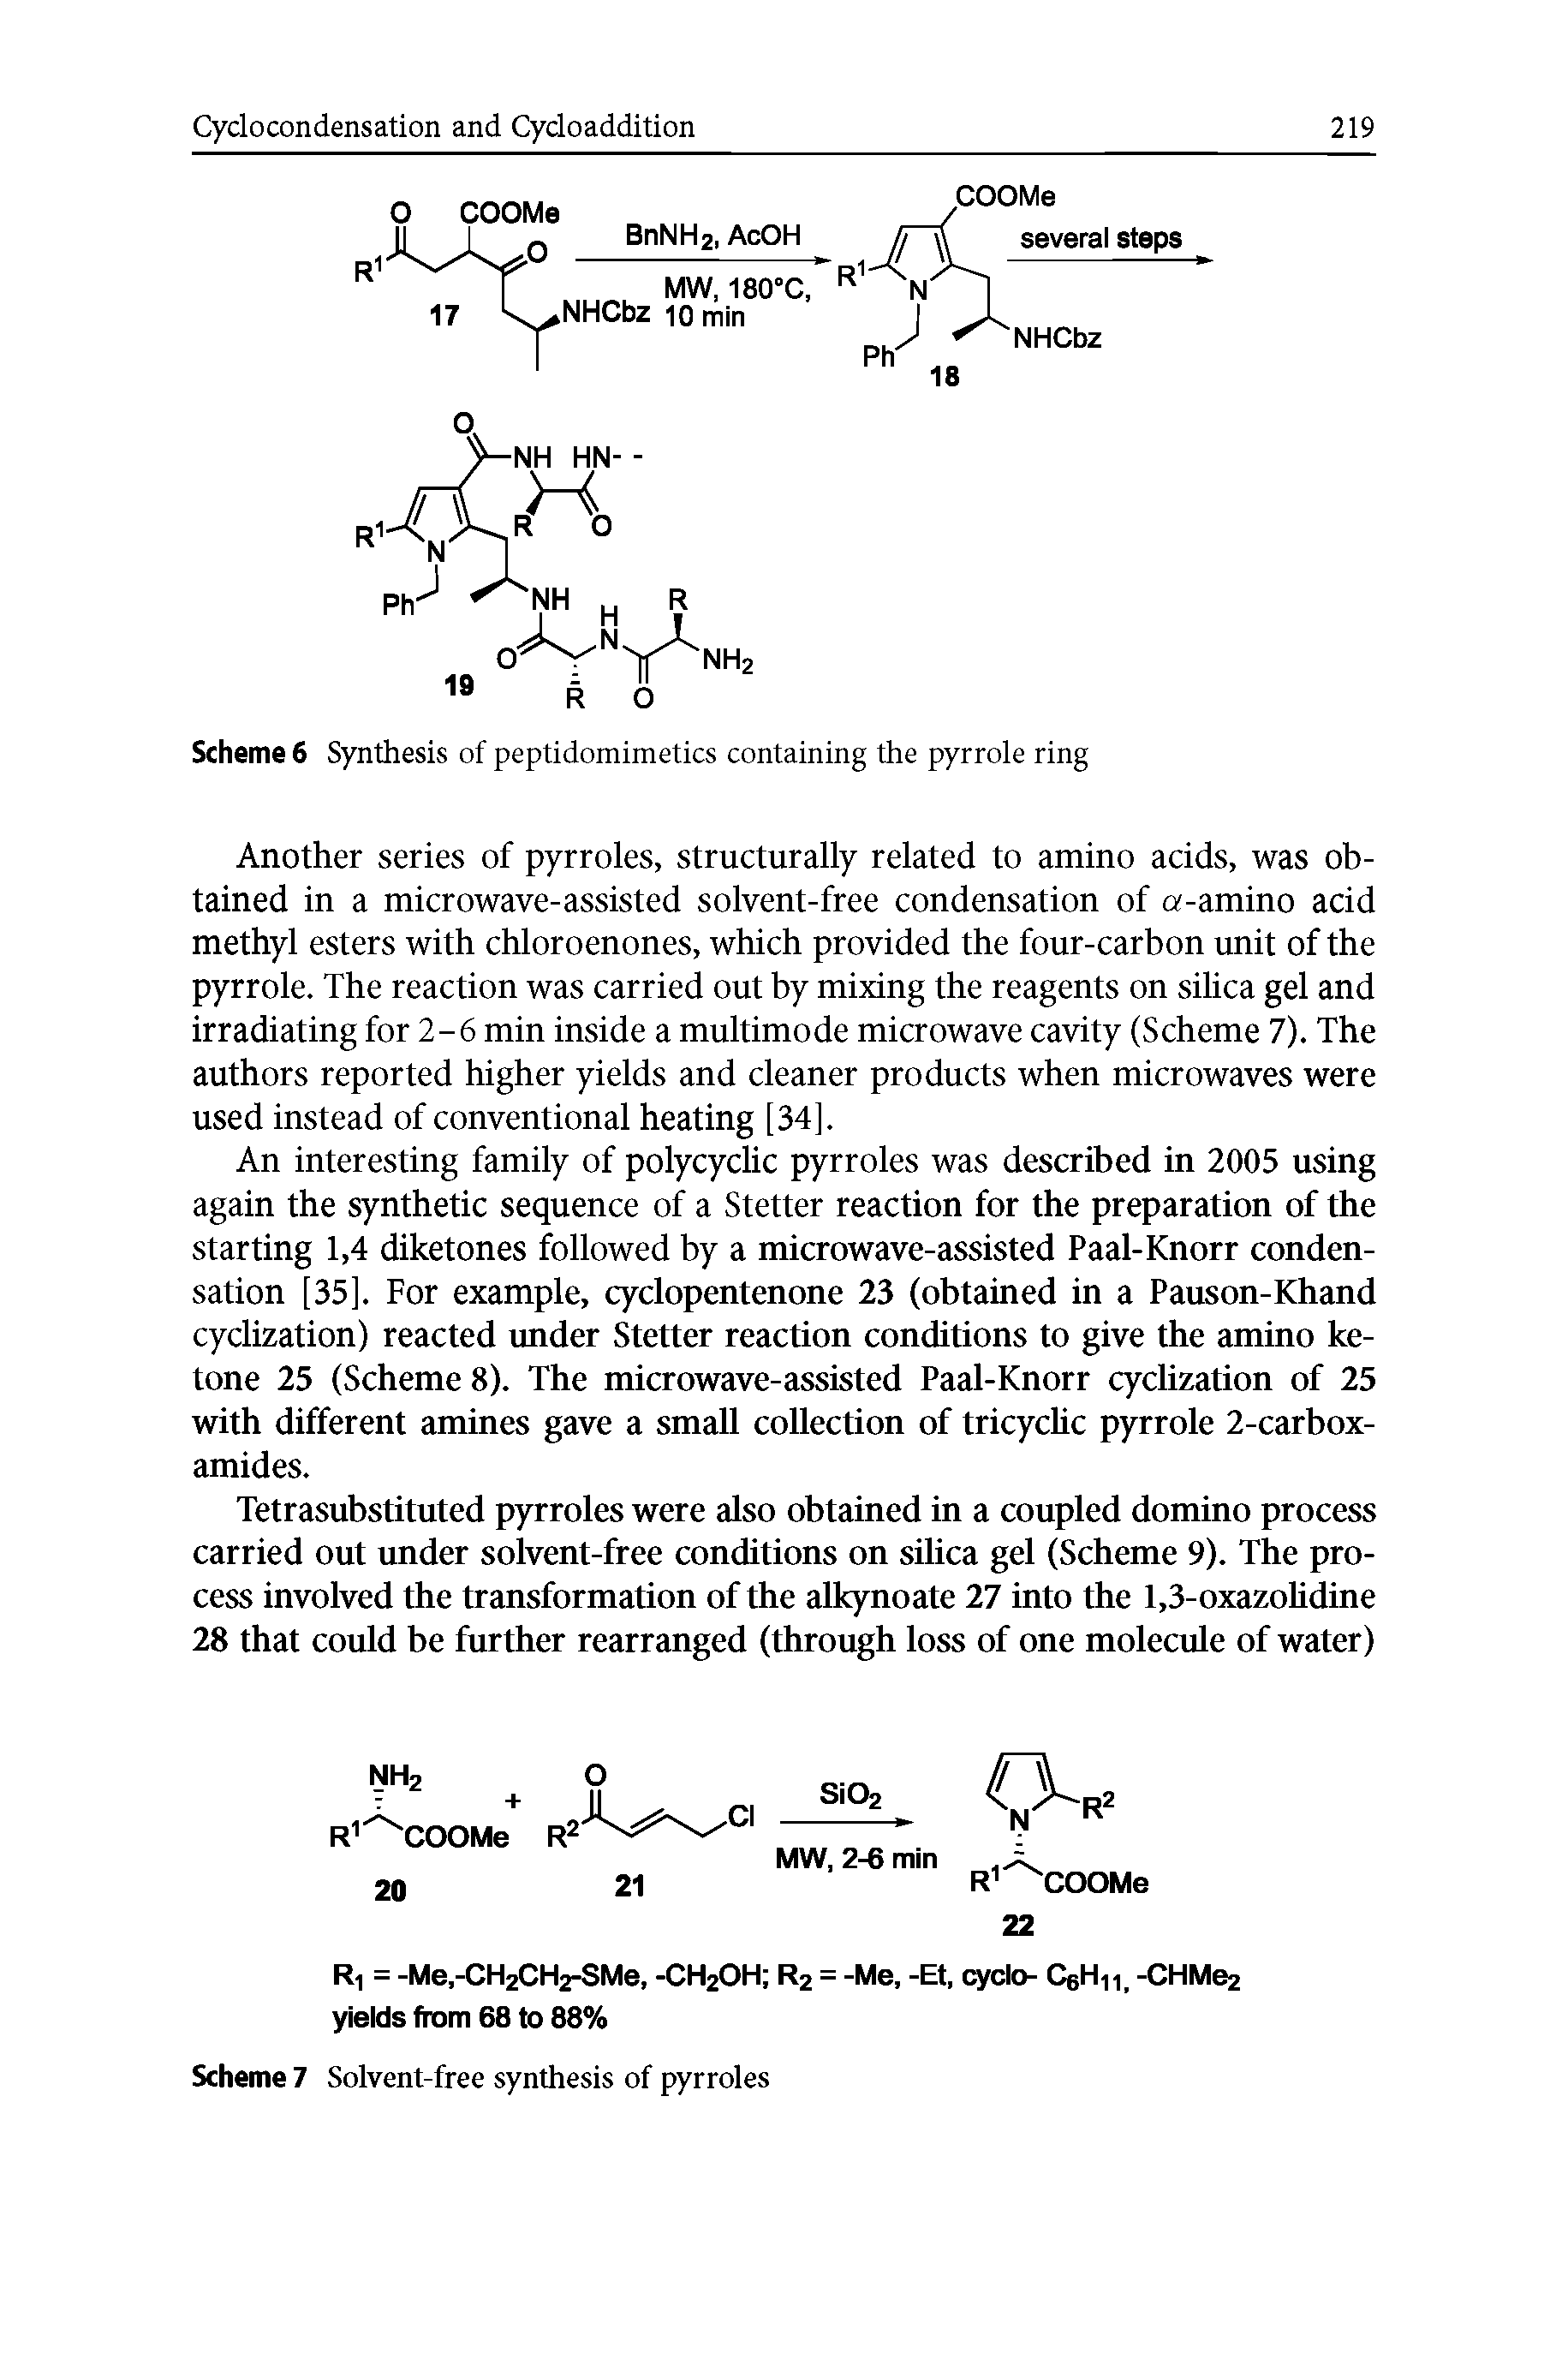 Scheme 6 Synthesis of peptidomimetics containing the pyrrole ring...